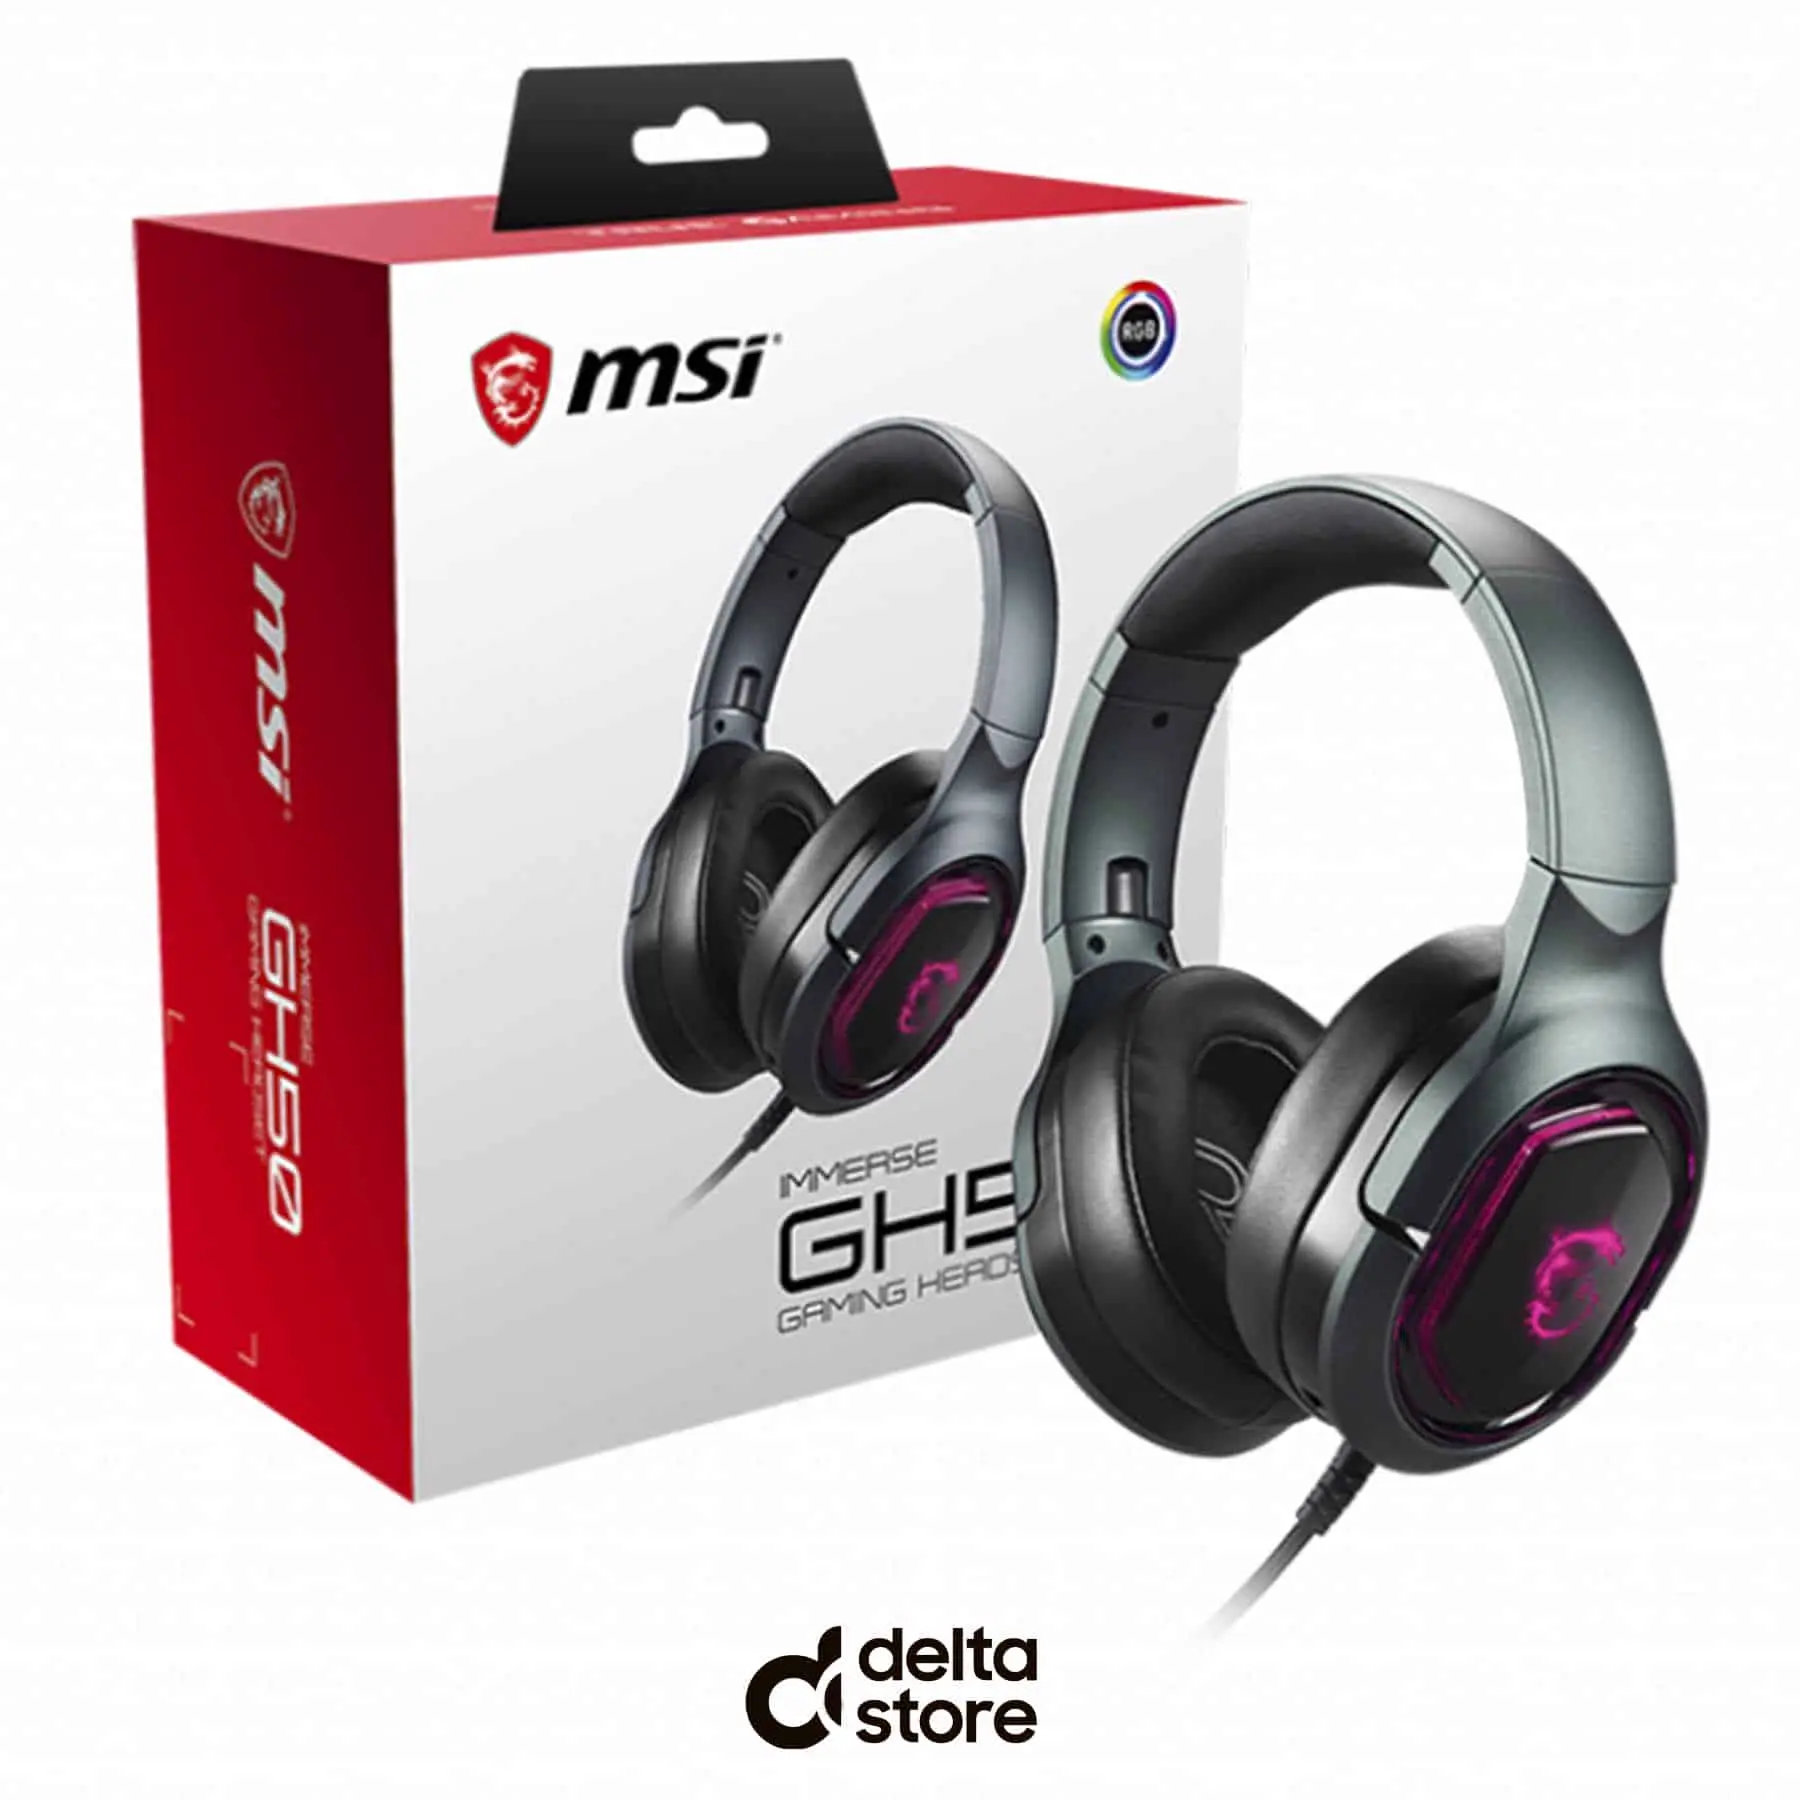 MSI immerse GH50 Gamig Headset